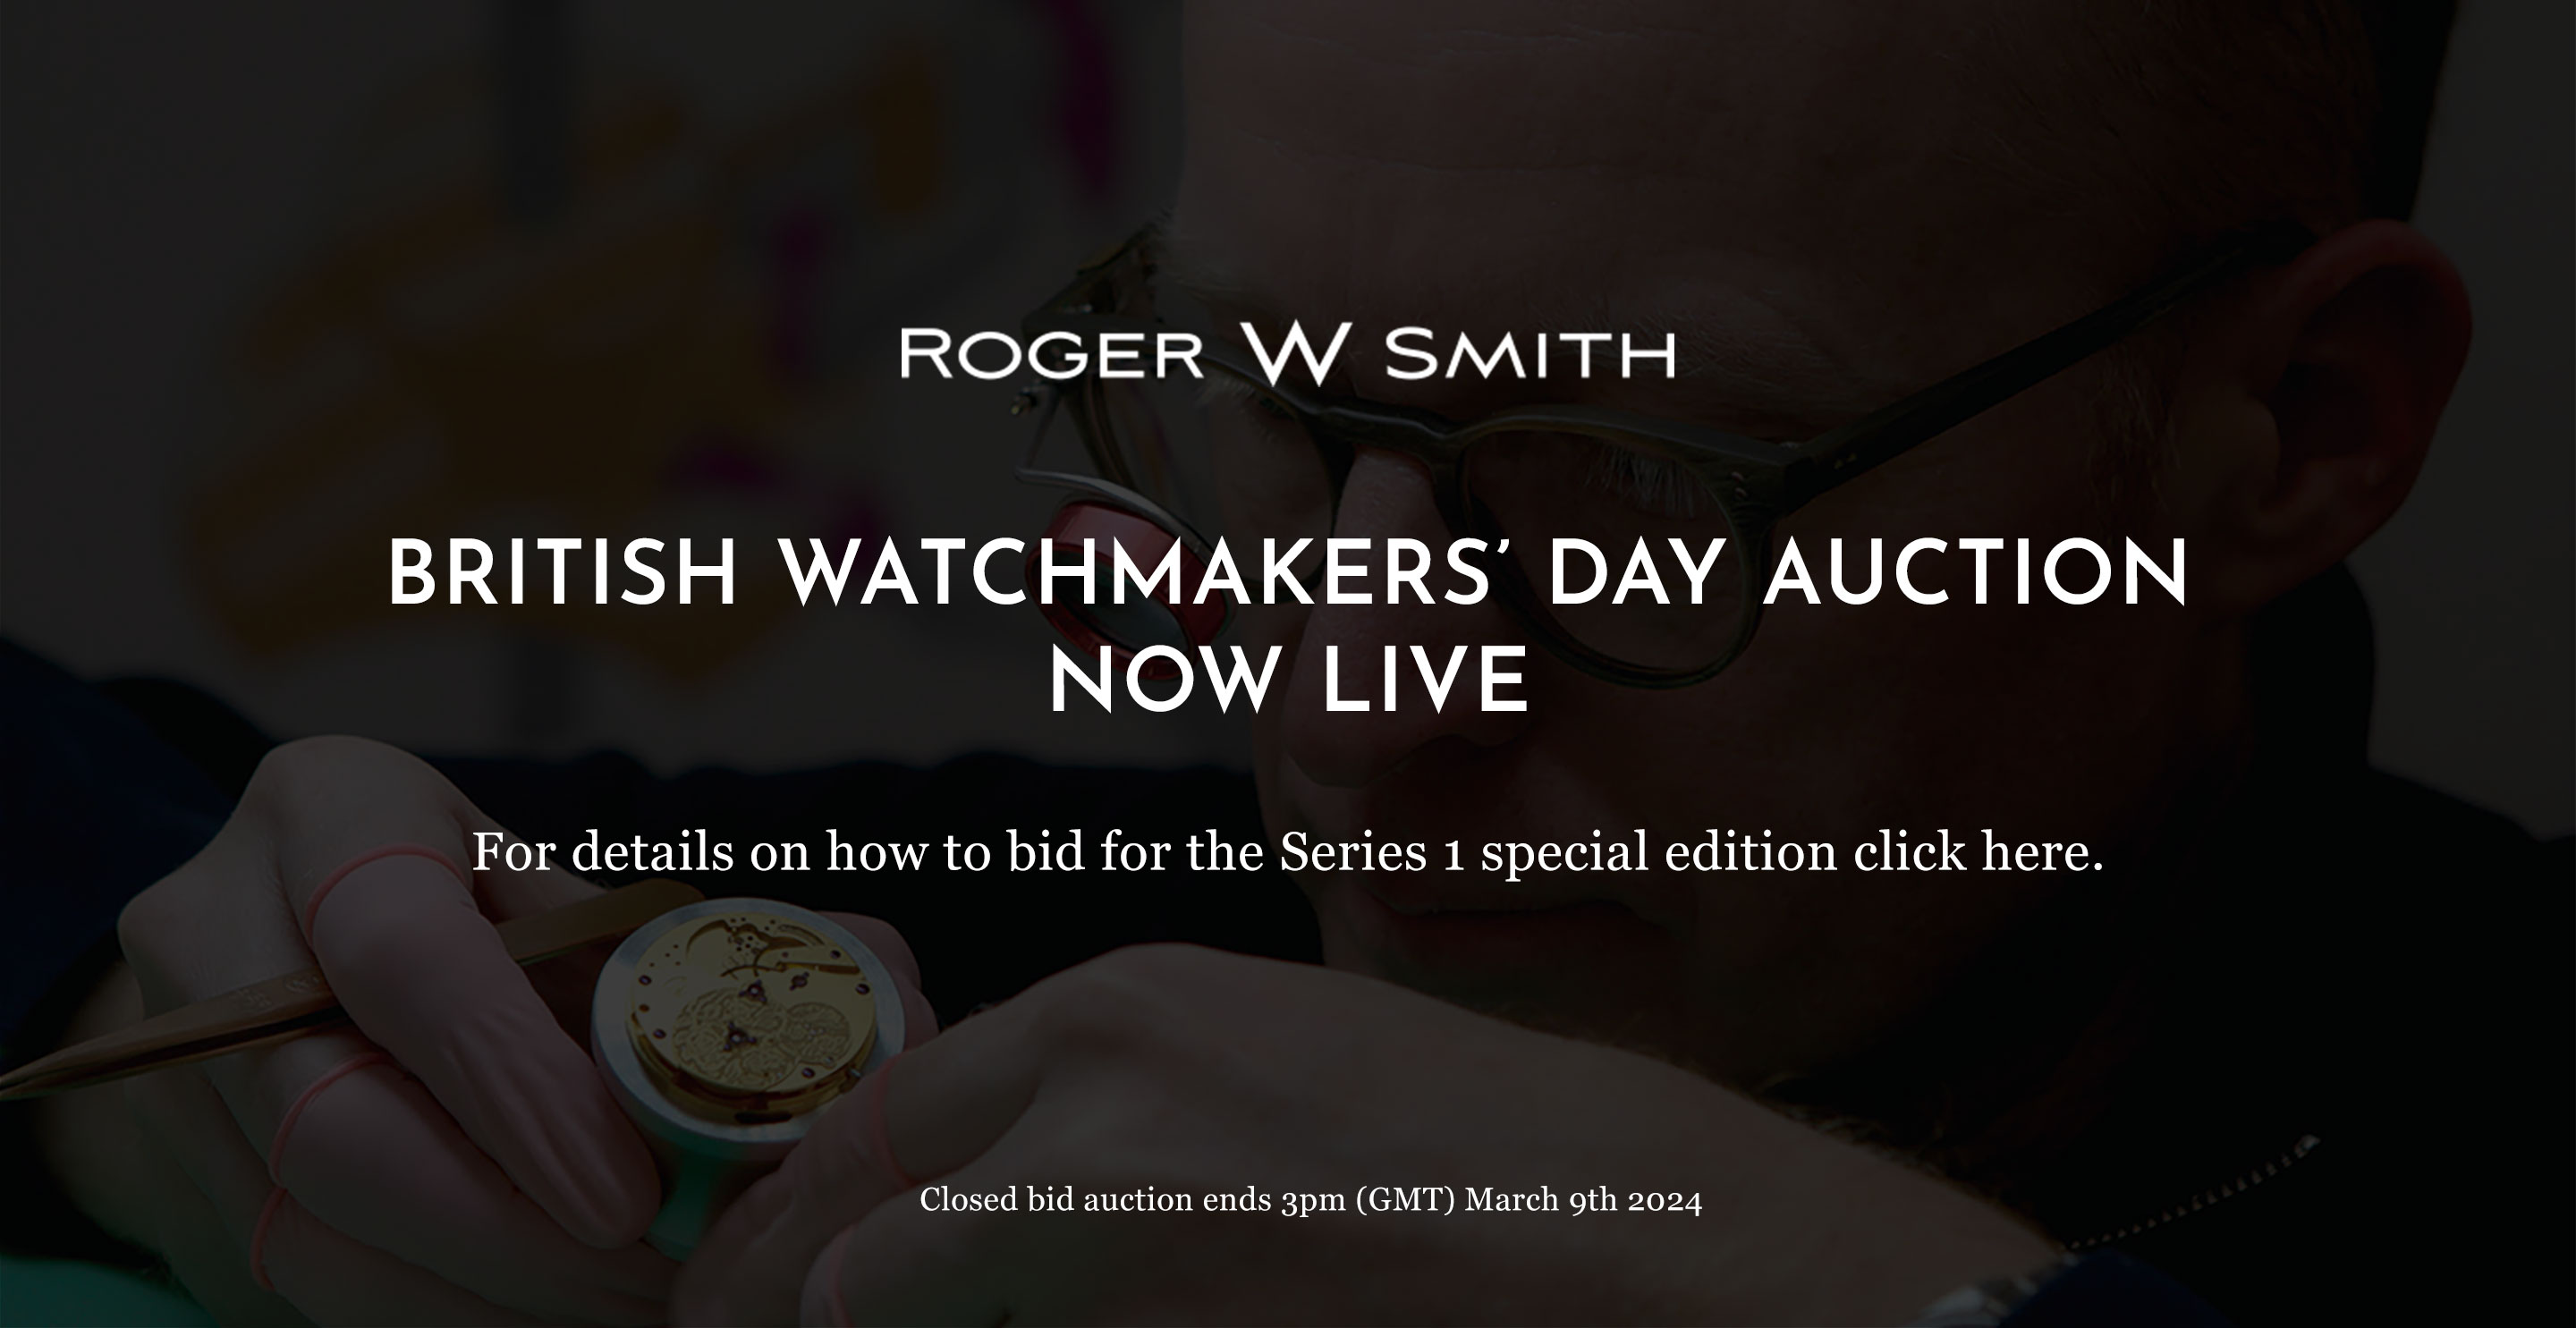 British Watchmakers Day AUCTION NOW LIVE - Closed bid auction ends 3pm (GMT) March 9th 2024 - For details on how to bid for the Series 1 special edition click here